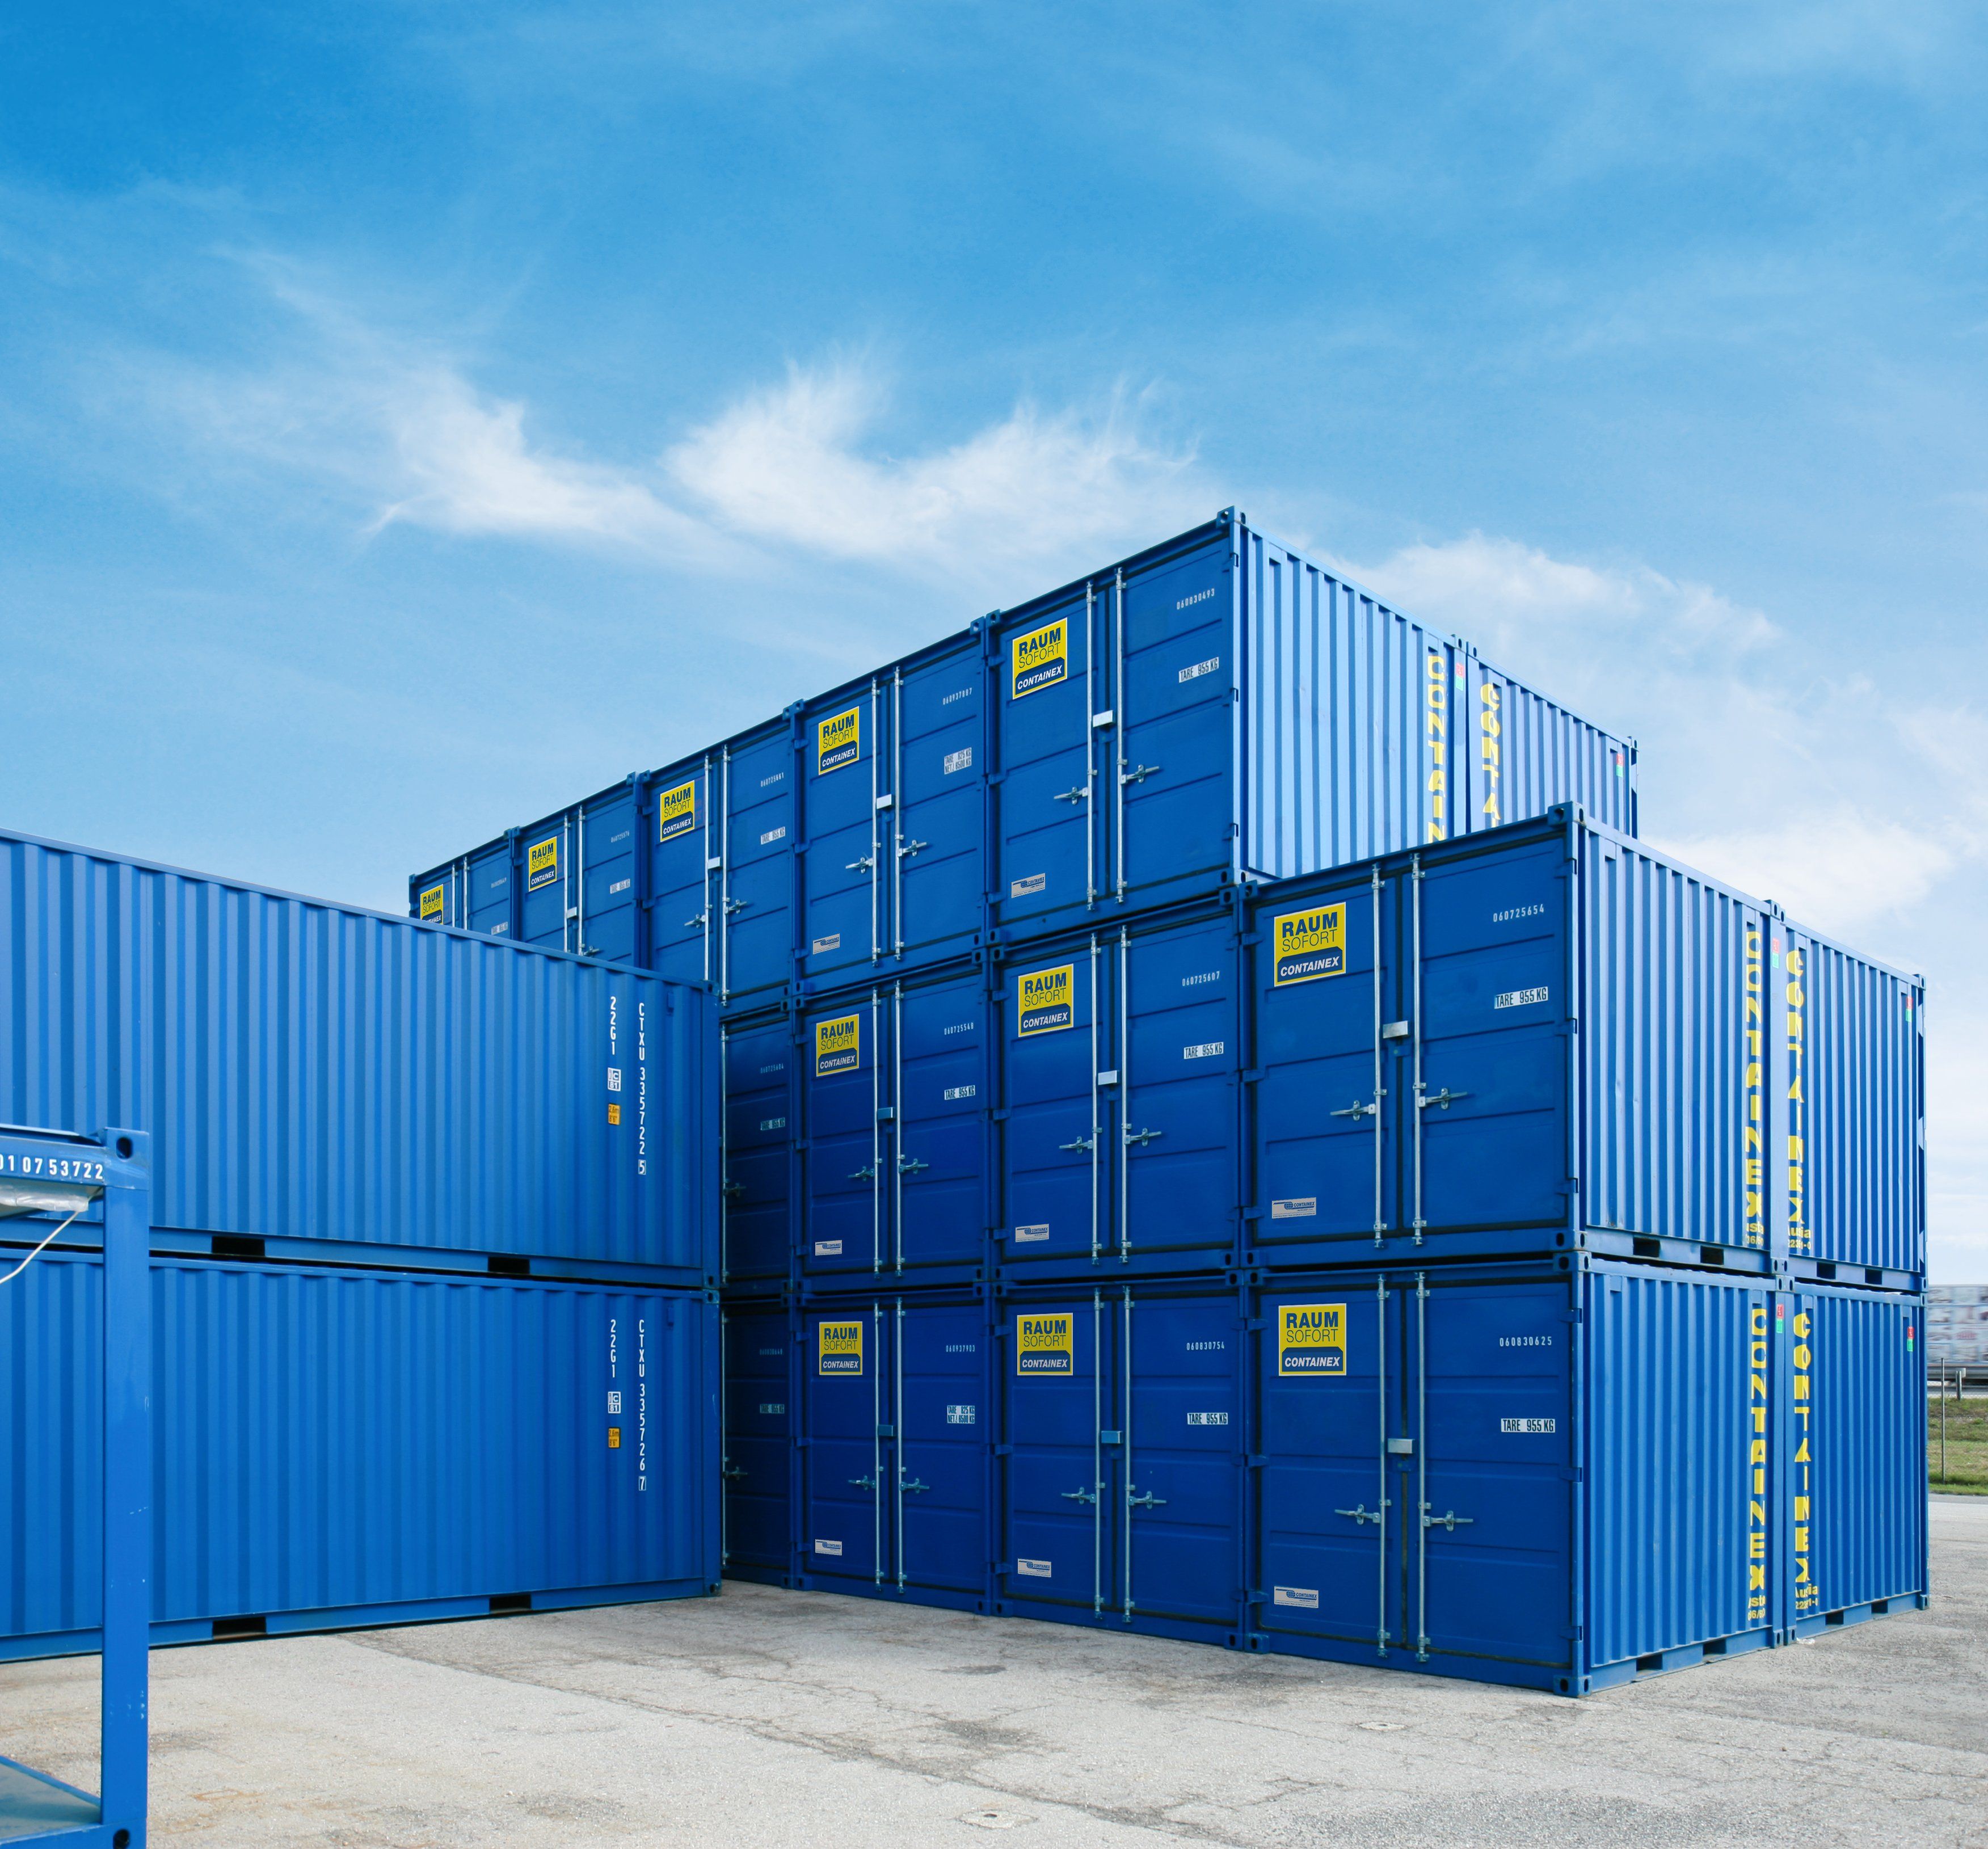 Rent a storage container